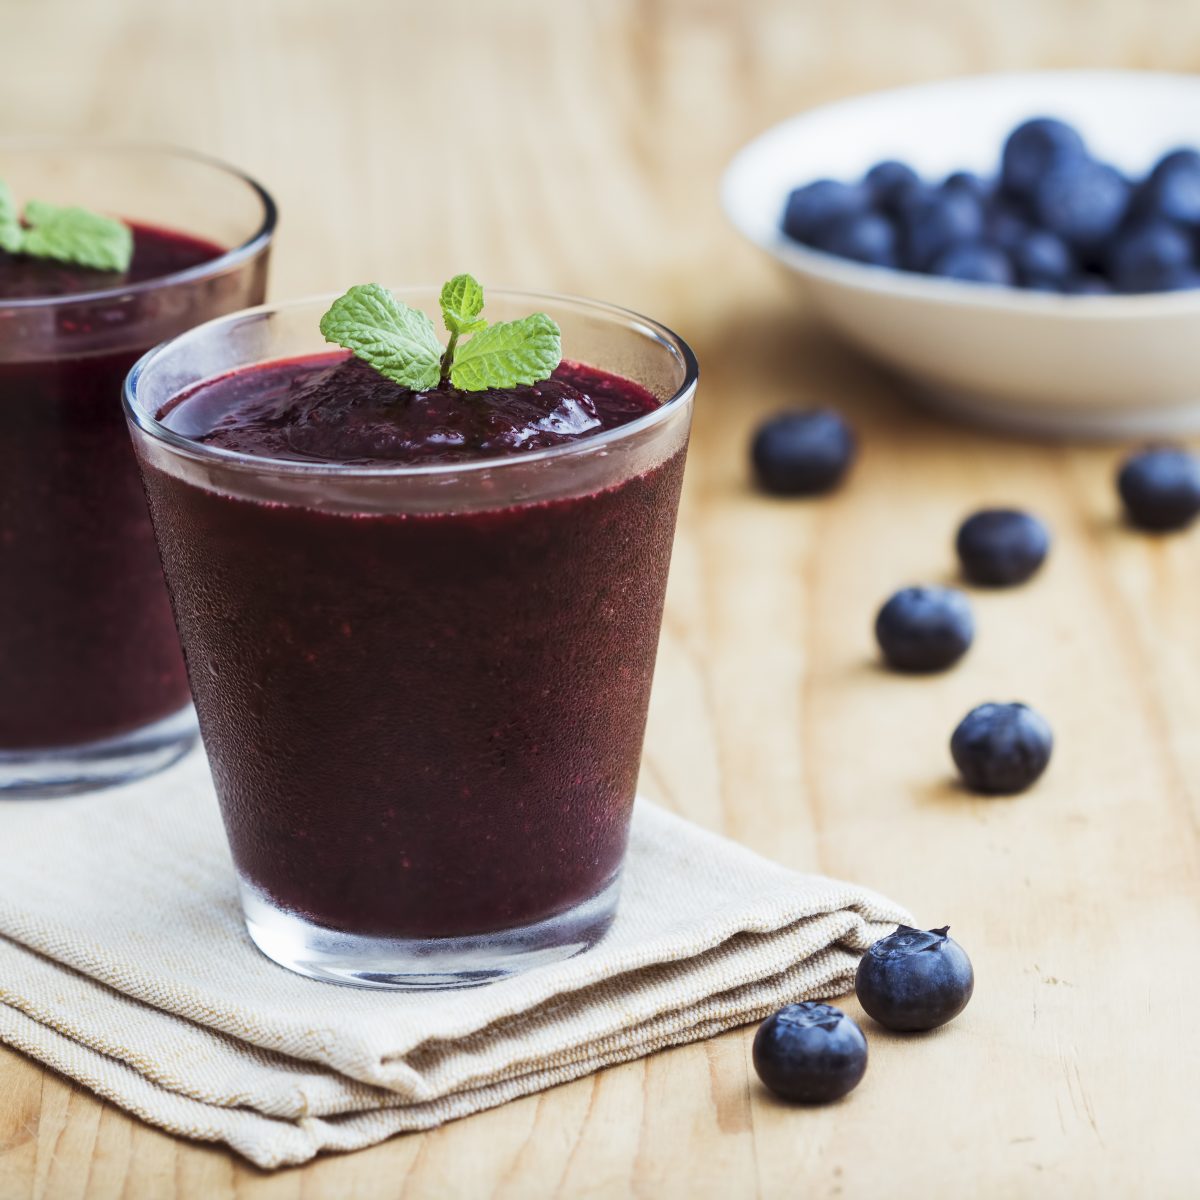 Dr Fuhrman's Blueberry Flax Smoothie(tanjichica7/iStock)